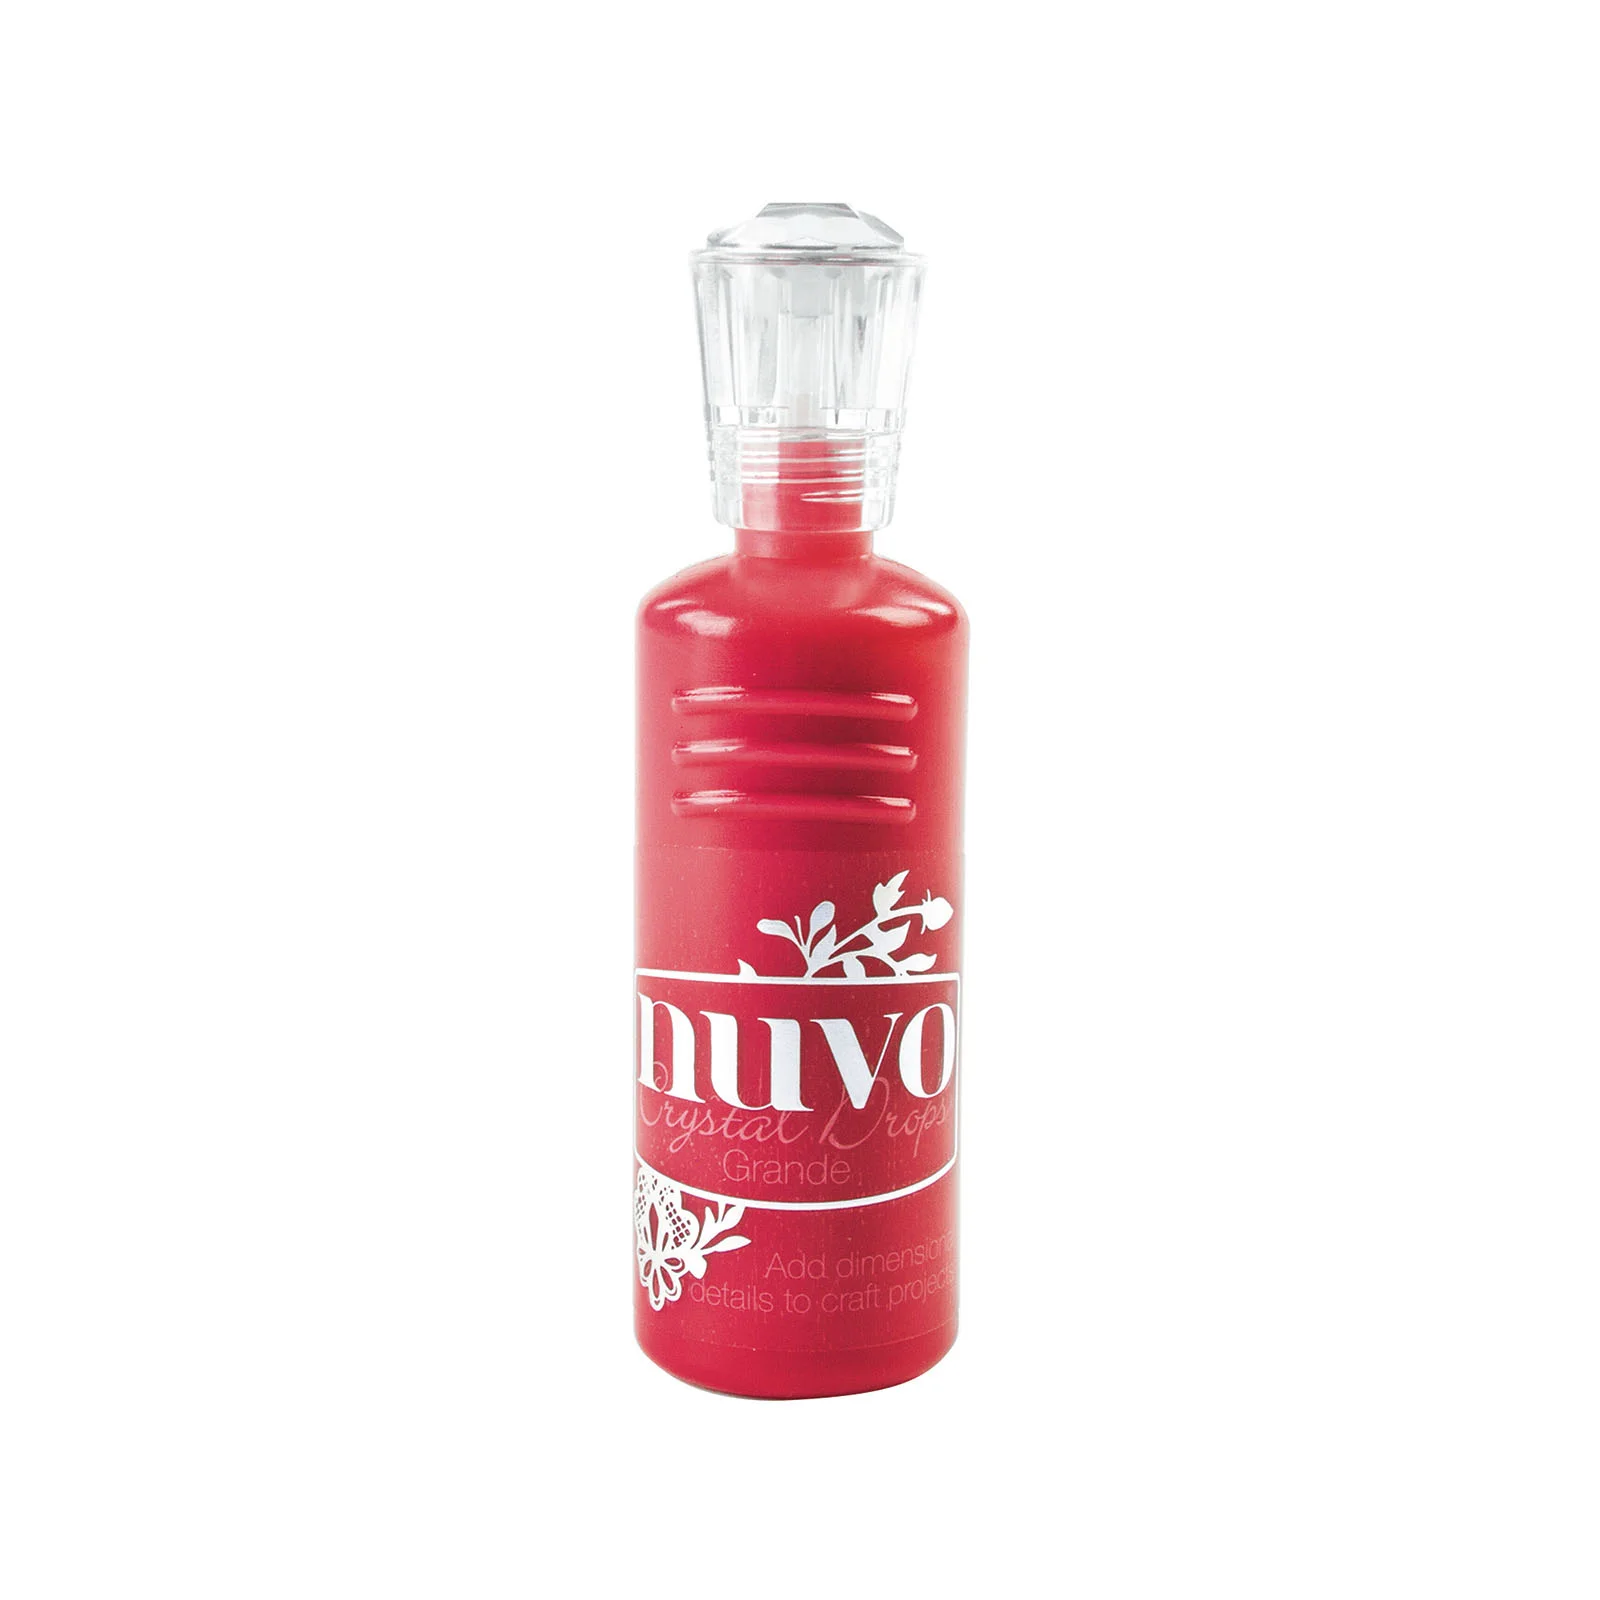 Crystal drops Grande Red Berry- Nuvo